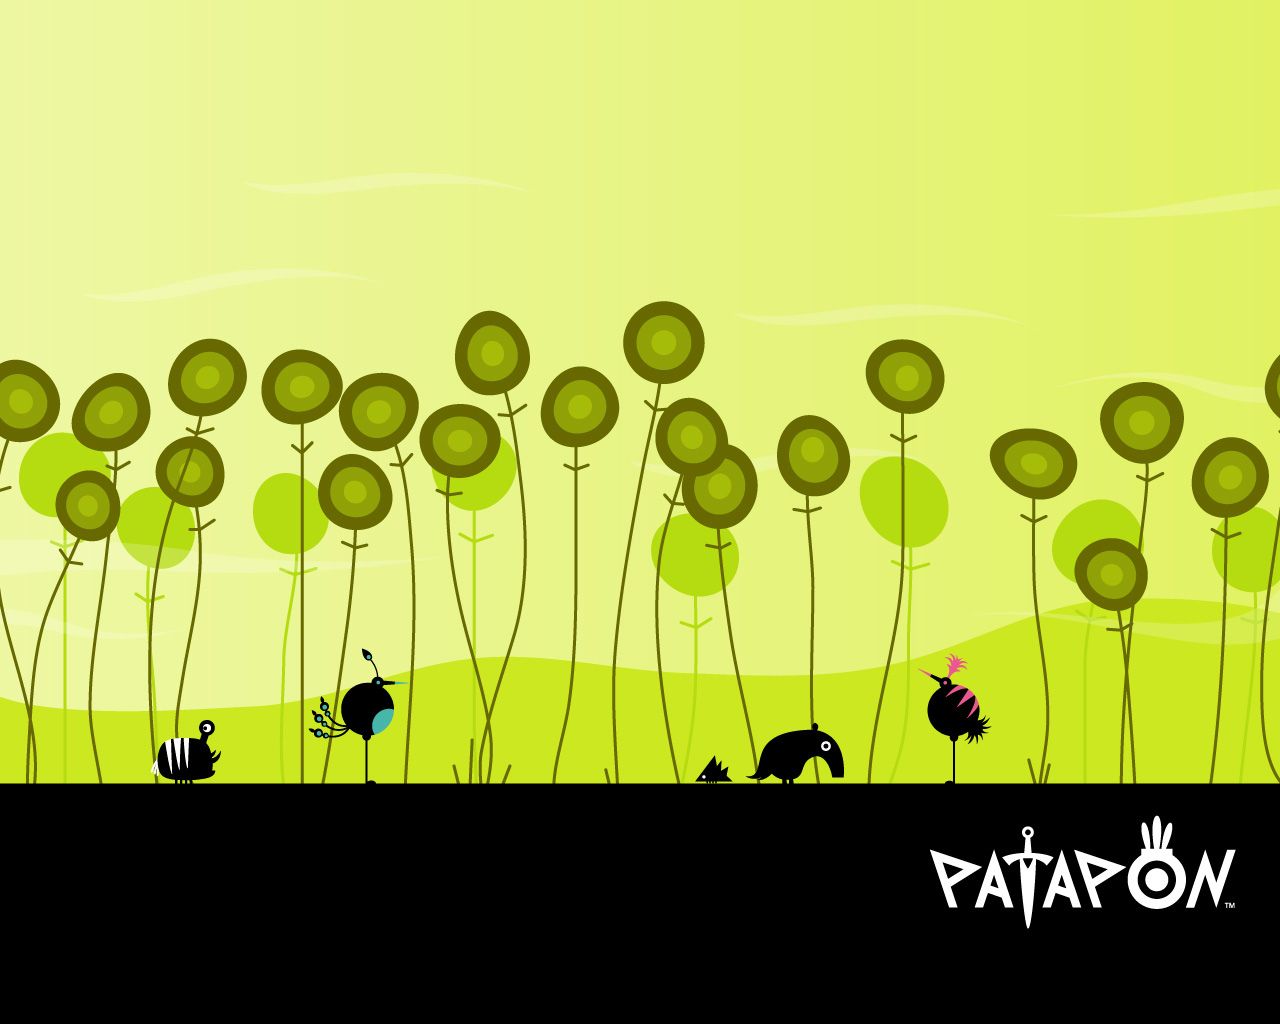 Video Game Patapon Wallpaper In